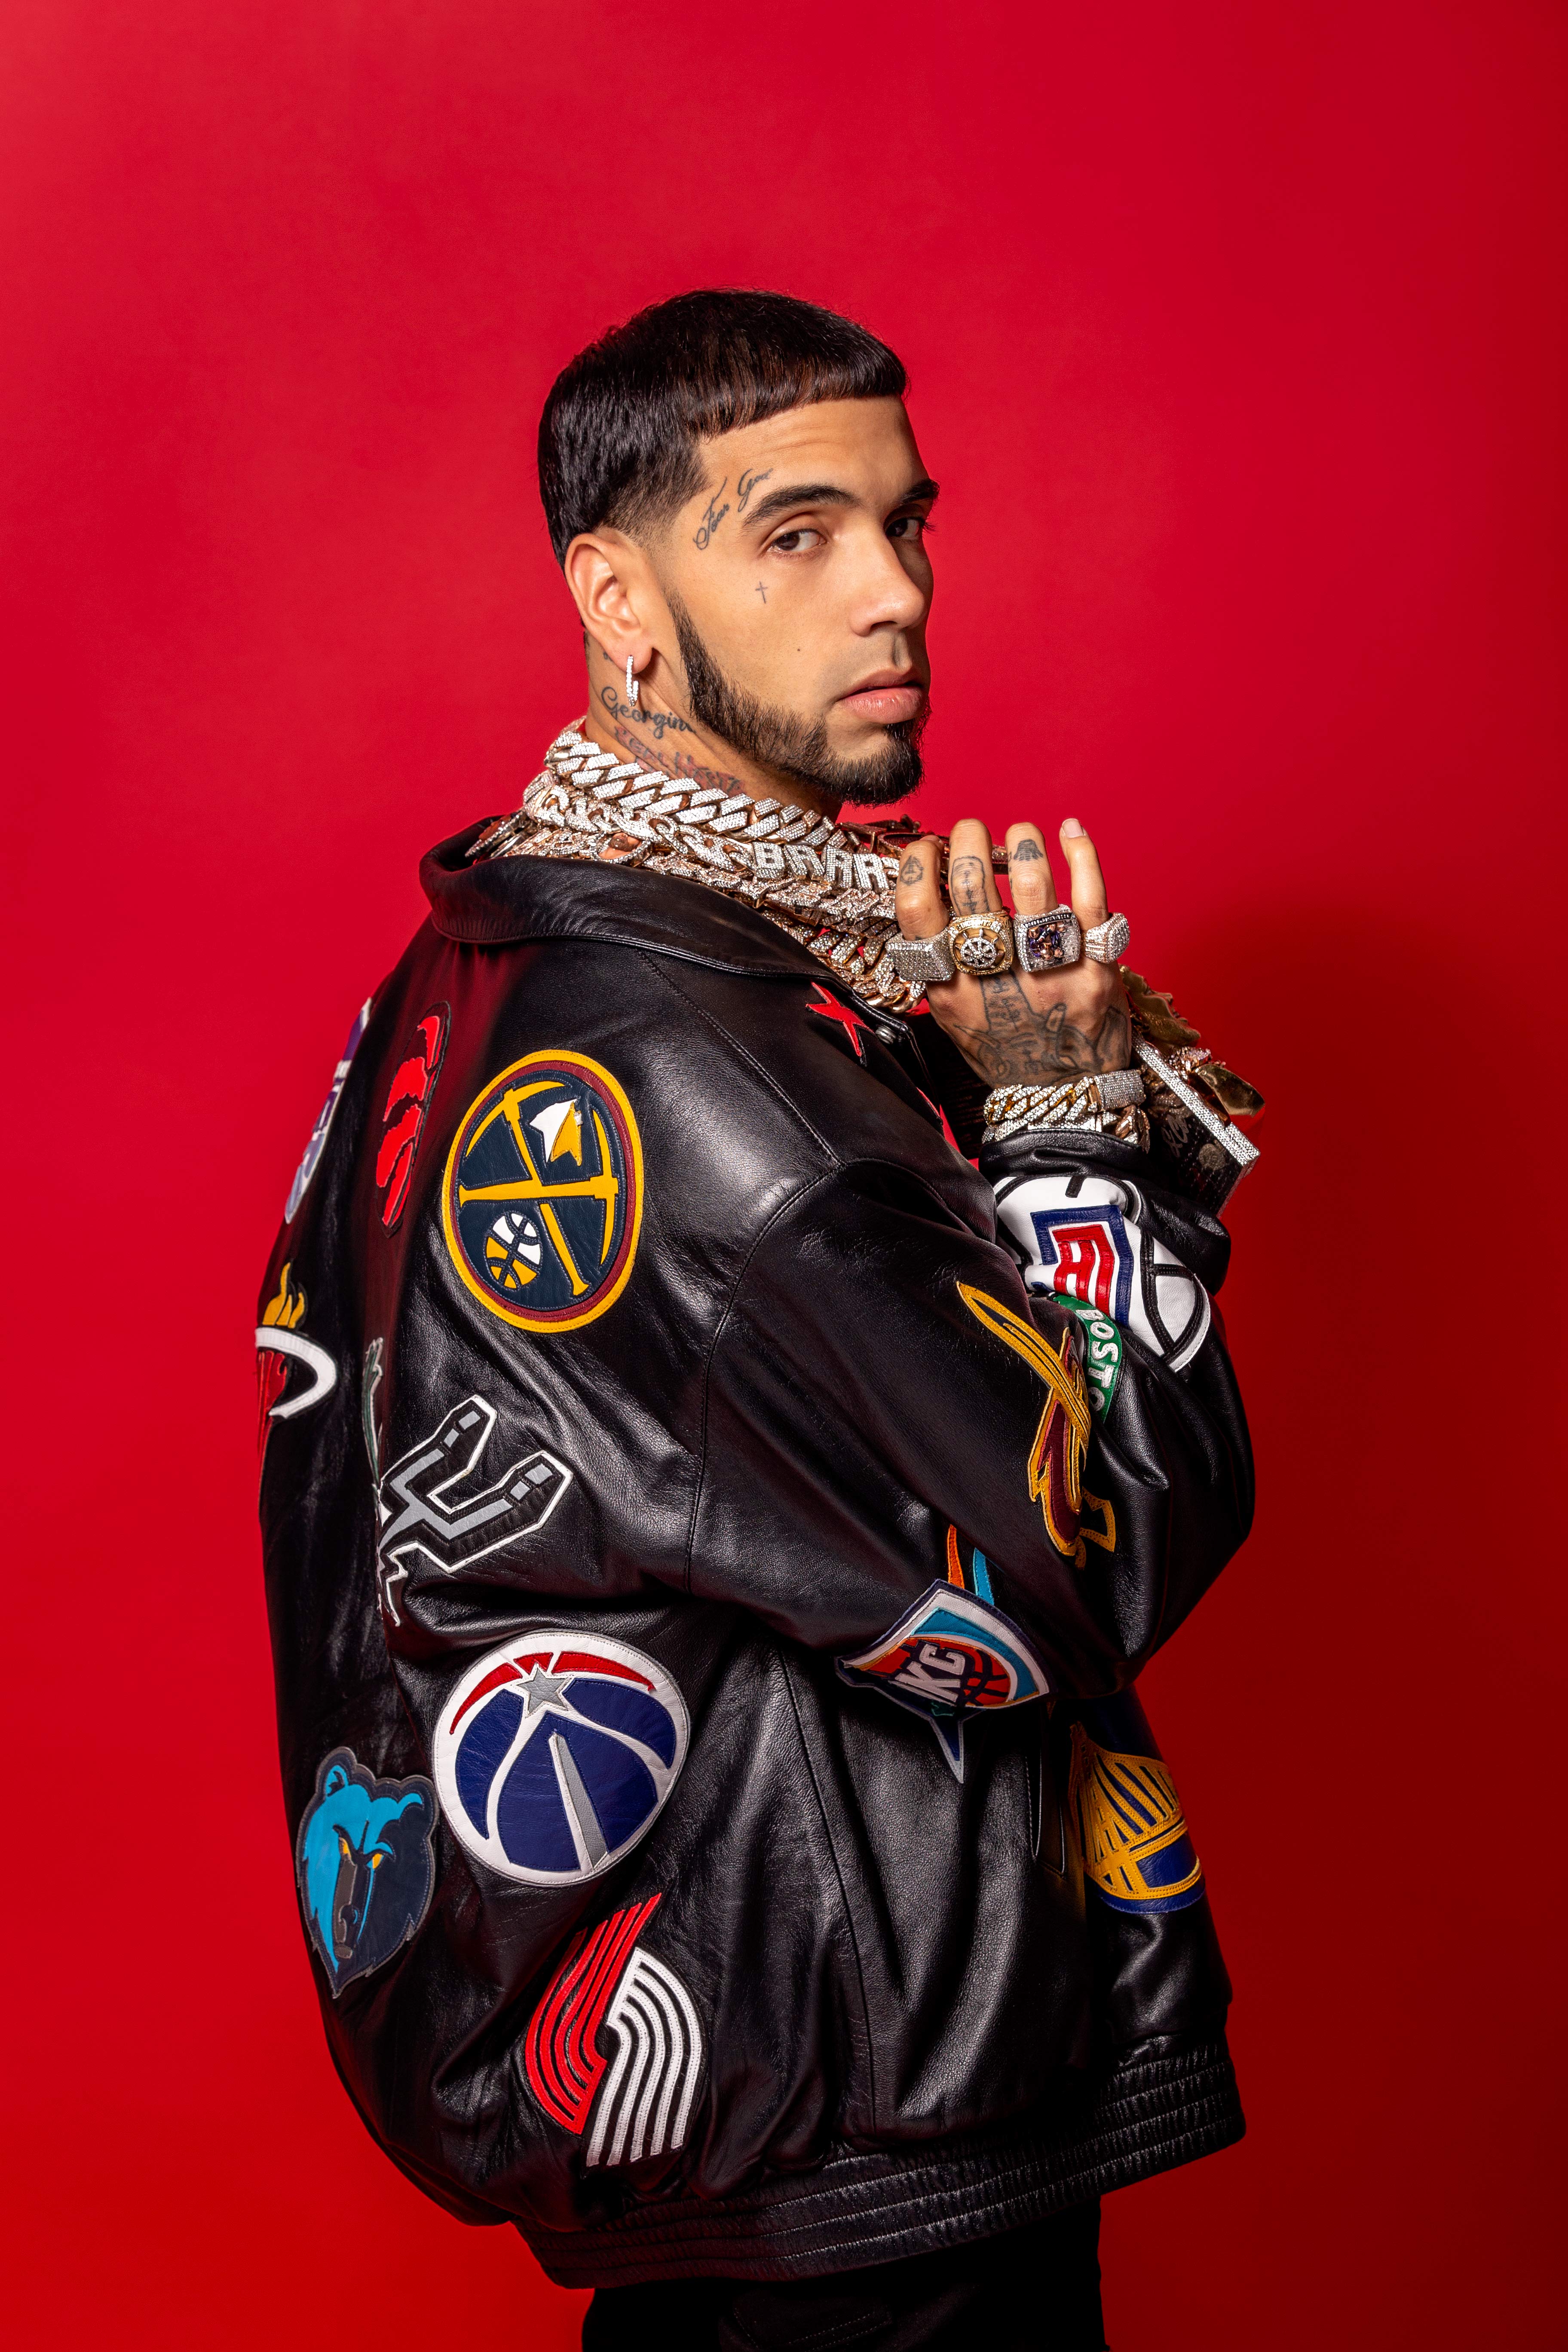 ANUEL AA: LEGENDS NEVER DIE WORLD TOUR in Dallas promo photo for Artist presale offer code